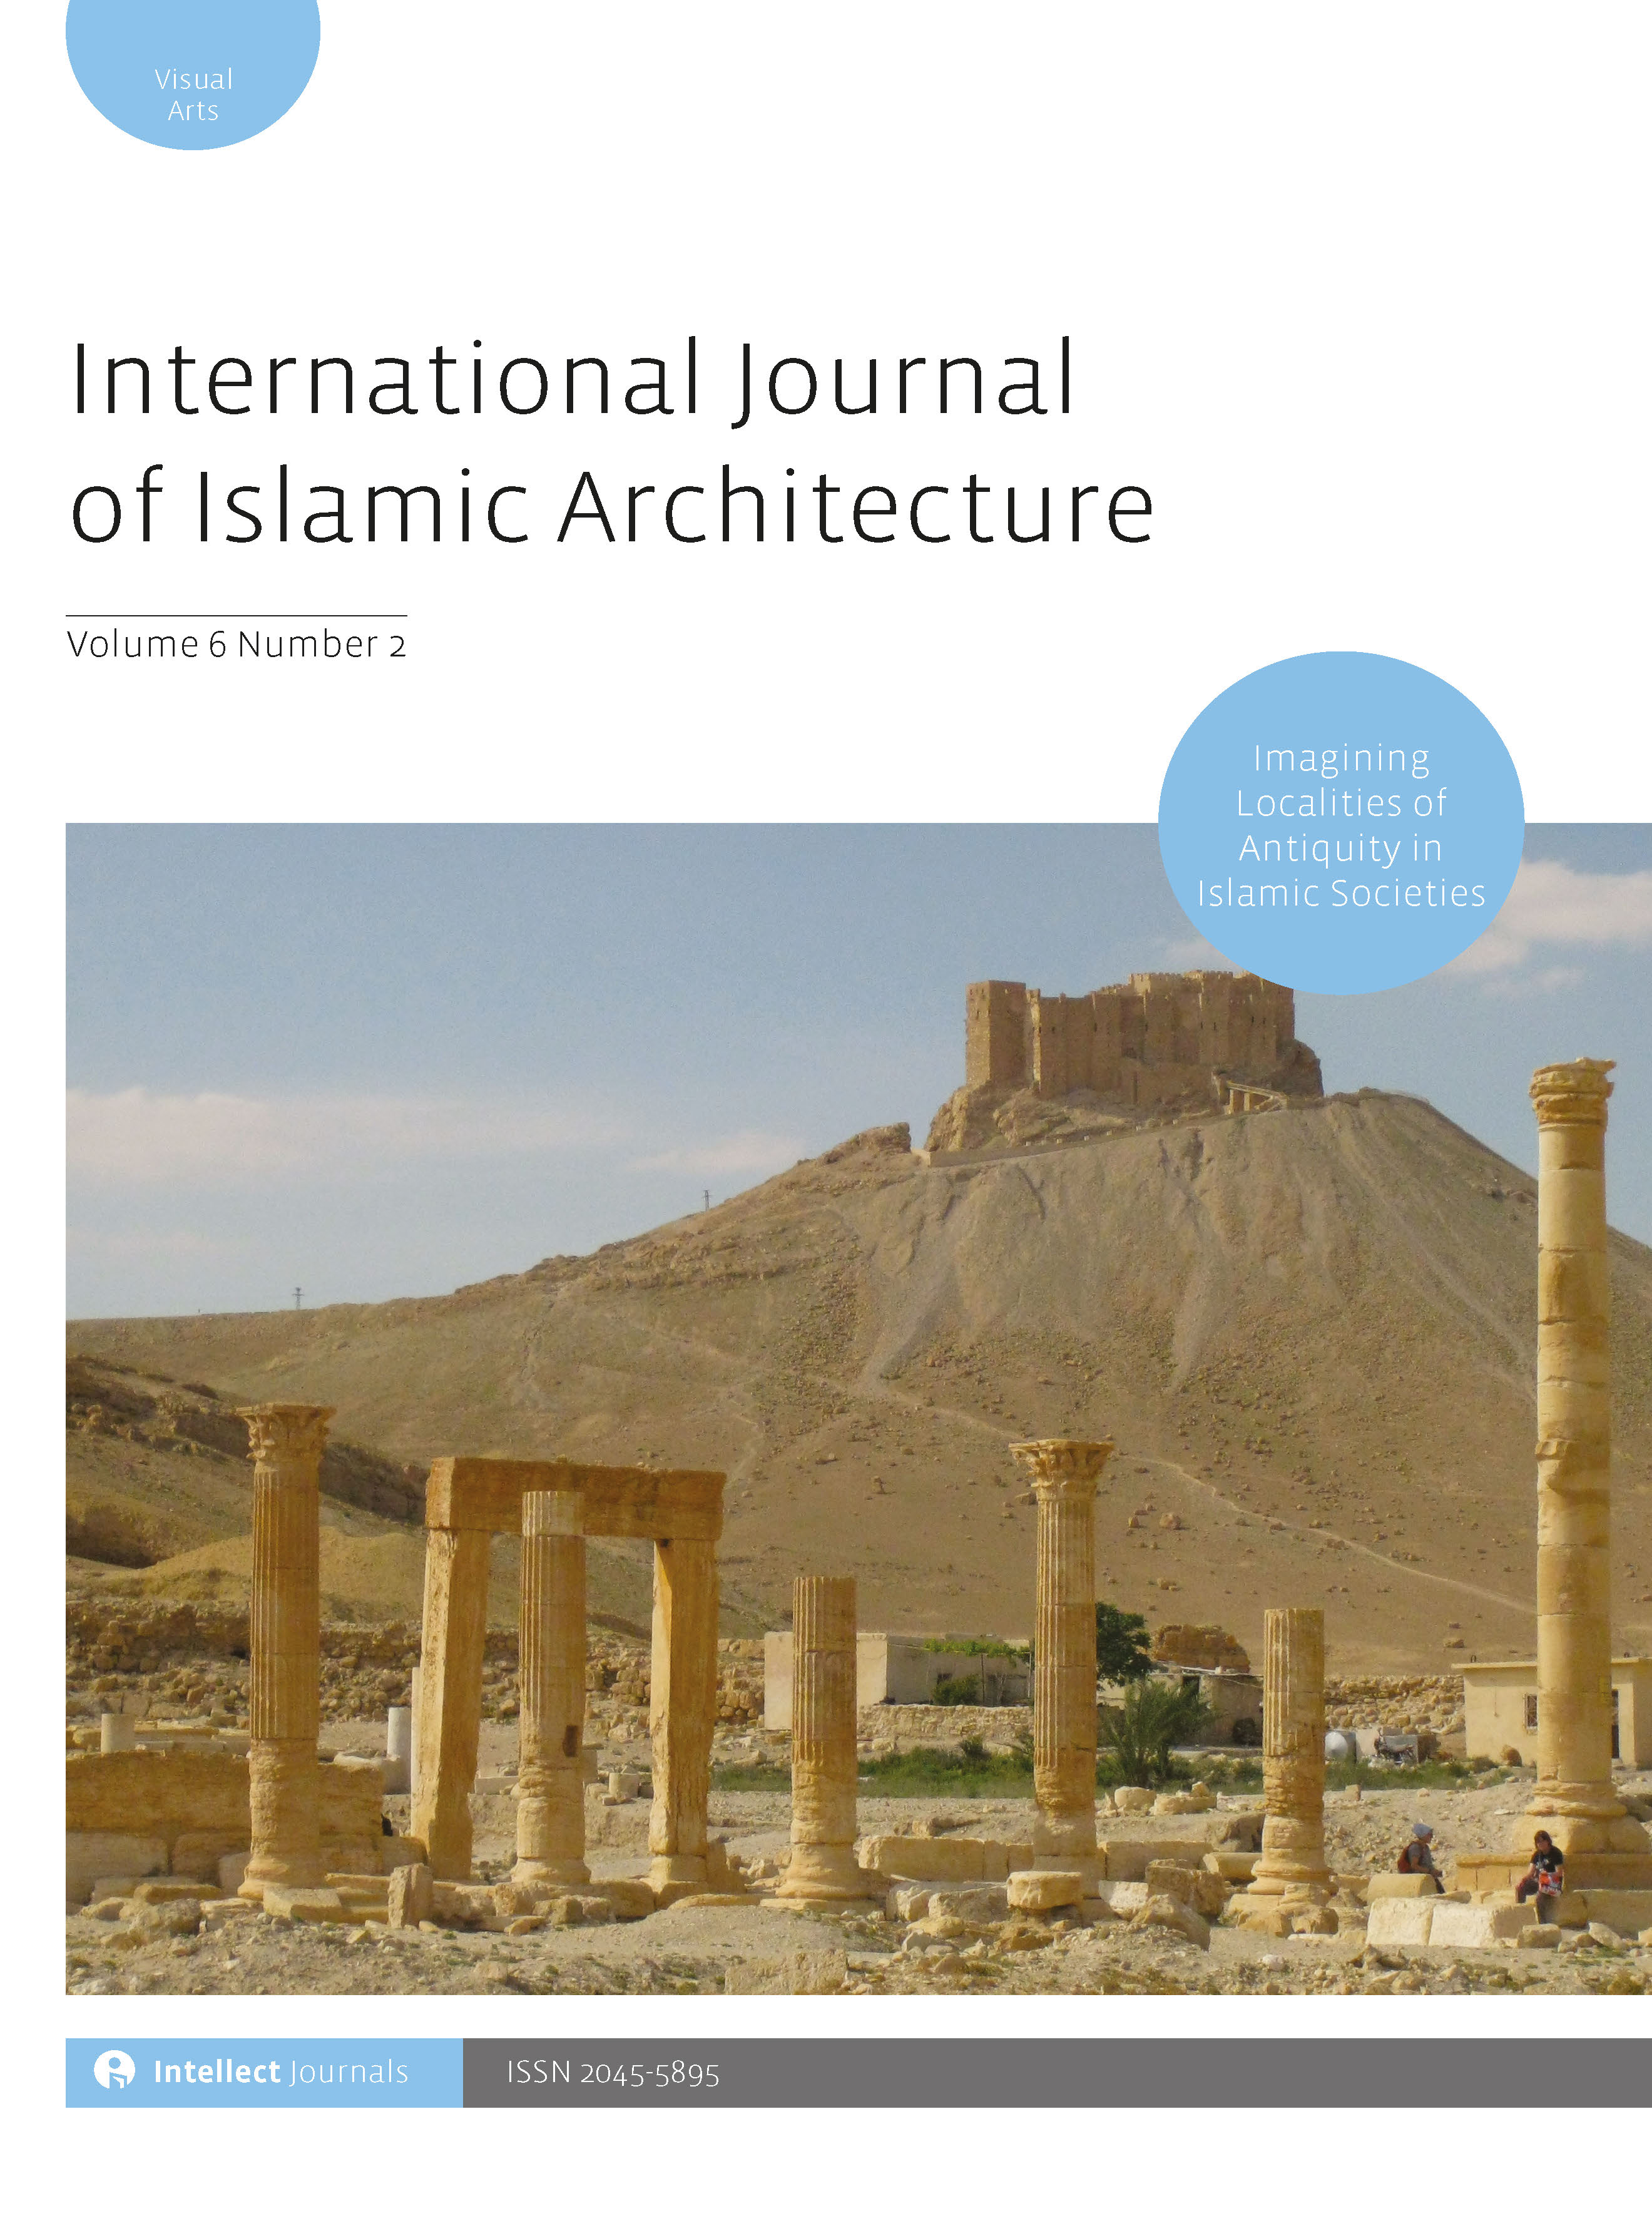 Santhi Kavuri-Bauer - This article proposes that Indian Islamic architectural practices of the Sultanate period (thirteenth to sixteenth century) were in keeping with centuries-old philosophical principles of reverence for ancient wonders. Guiding Indian Islamic rulers toward this disposition were Neoplatonic philosophies and texts organized around the structuring principle of wonders or ‘aja’ib. I argue that the discourses on the ‘aja’ib had a significant twofold impact on Islamic architectural practices in India. First, they influenced Islamic rulers of India to interpret and appreciate the non-Islamic ancient monuments not as traces of idolatrous worship that warranted destruction, but as wonders of God’s creation. Second, the preservation of such wonders or their partial incorporation into new buildings made their cosmological properties available to rulers desiring to project themselves as rational, divinely ordained sovereigns. This investigation will be focused on two ancient Indian pillars found in Delhi: the iron pillar in the Quwwat al-Islam Mosque and the Ashokan pillar found in Firuz Shah Kotla Fort. Through the lens of ‘aja’ib it may be proposed that early Muslim rulers were drawing on Hindu and Buddhist architecture to create mystical spaces with the aim of ordering new relationships between the conquering power and the new topography over which they ruled.&nbsp;<div><br></div><div>Keywords: Delhi;&nbsp;India;&nbsp;monuments;&nbsp;pillars;&nbsp;wonders;&nbsp;‘aja’ib</div>